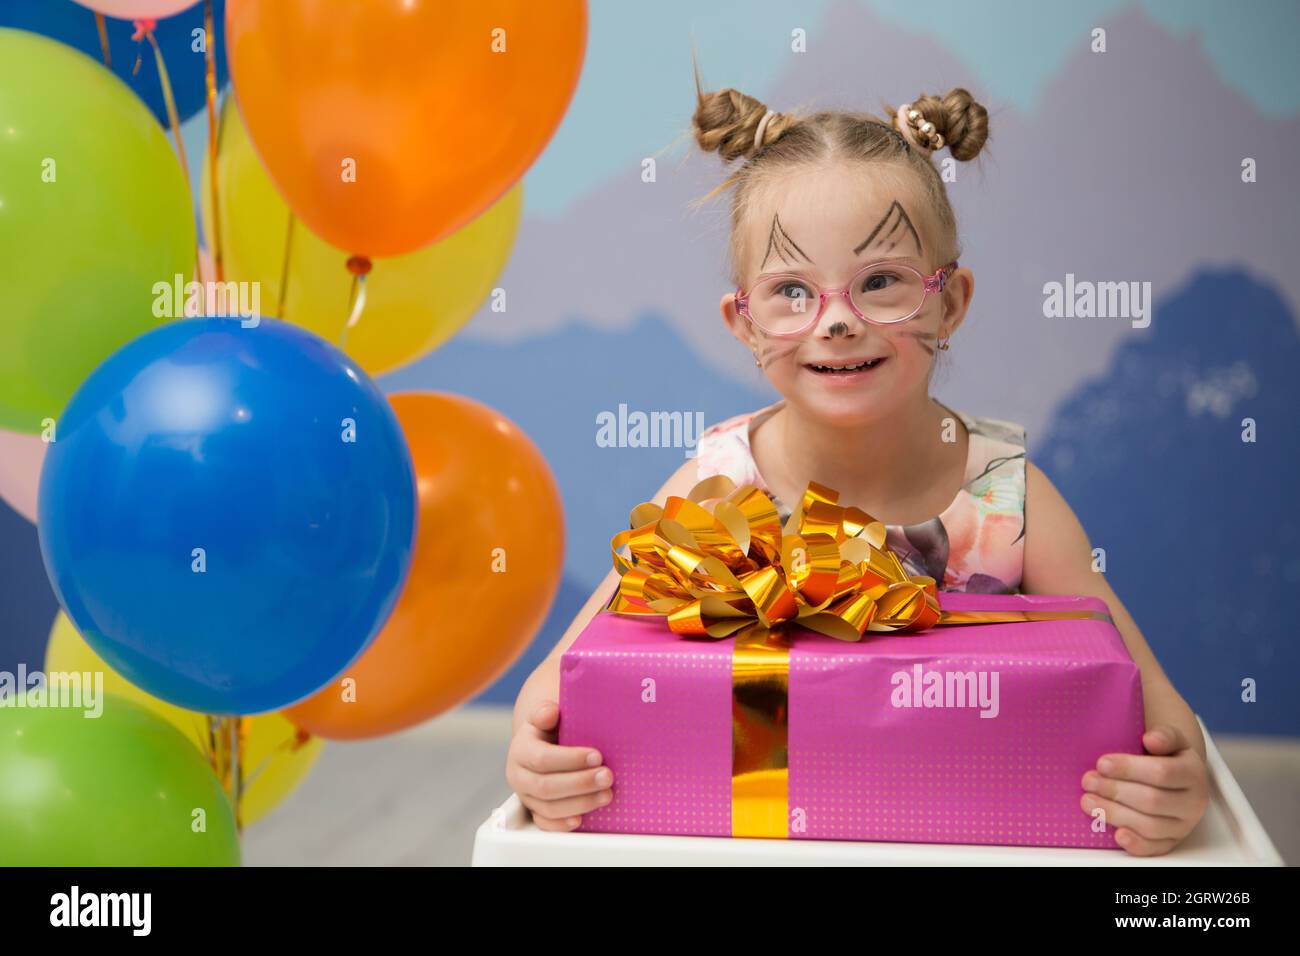 Beautiful girl with Down syndrome holds a big gift for her birthday Stock Photo